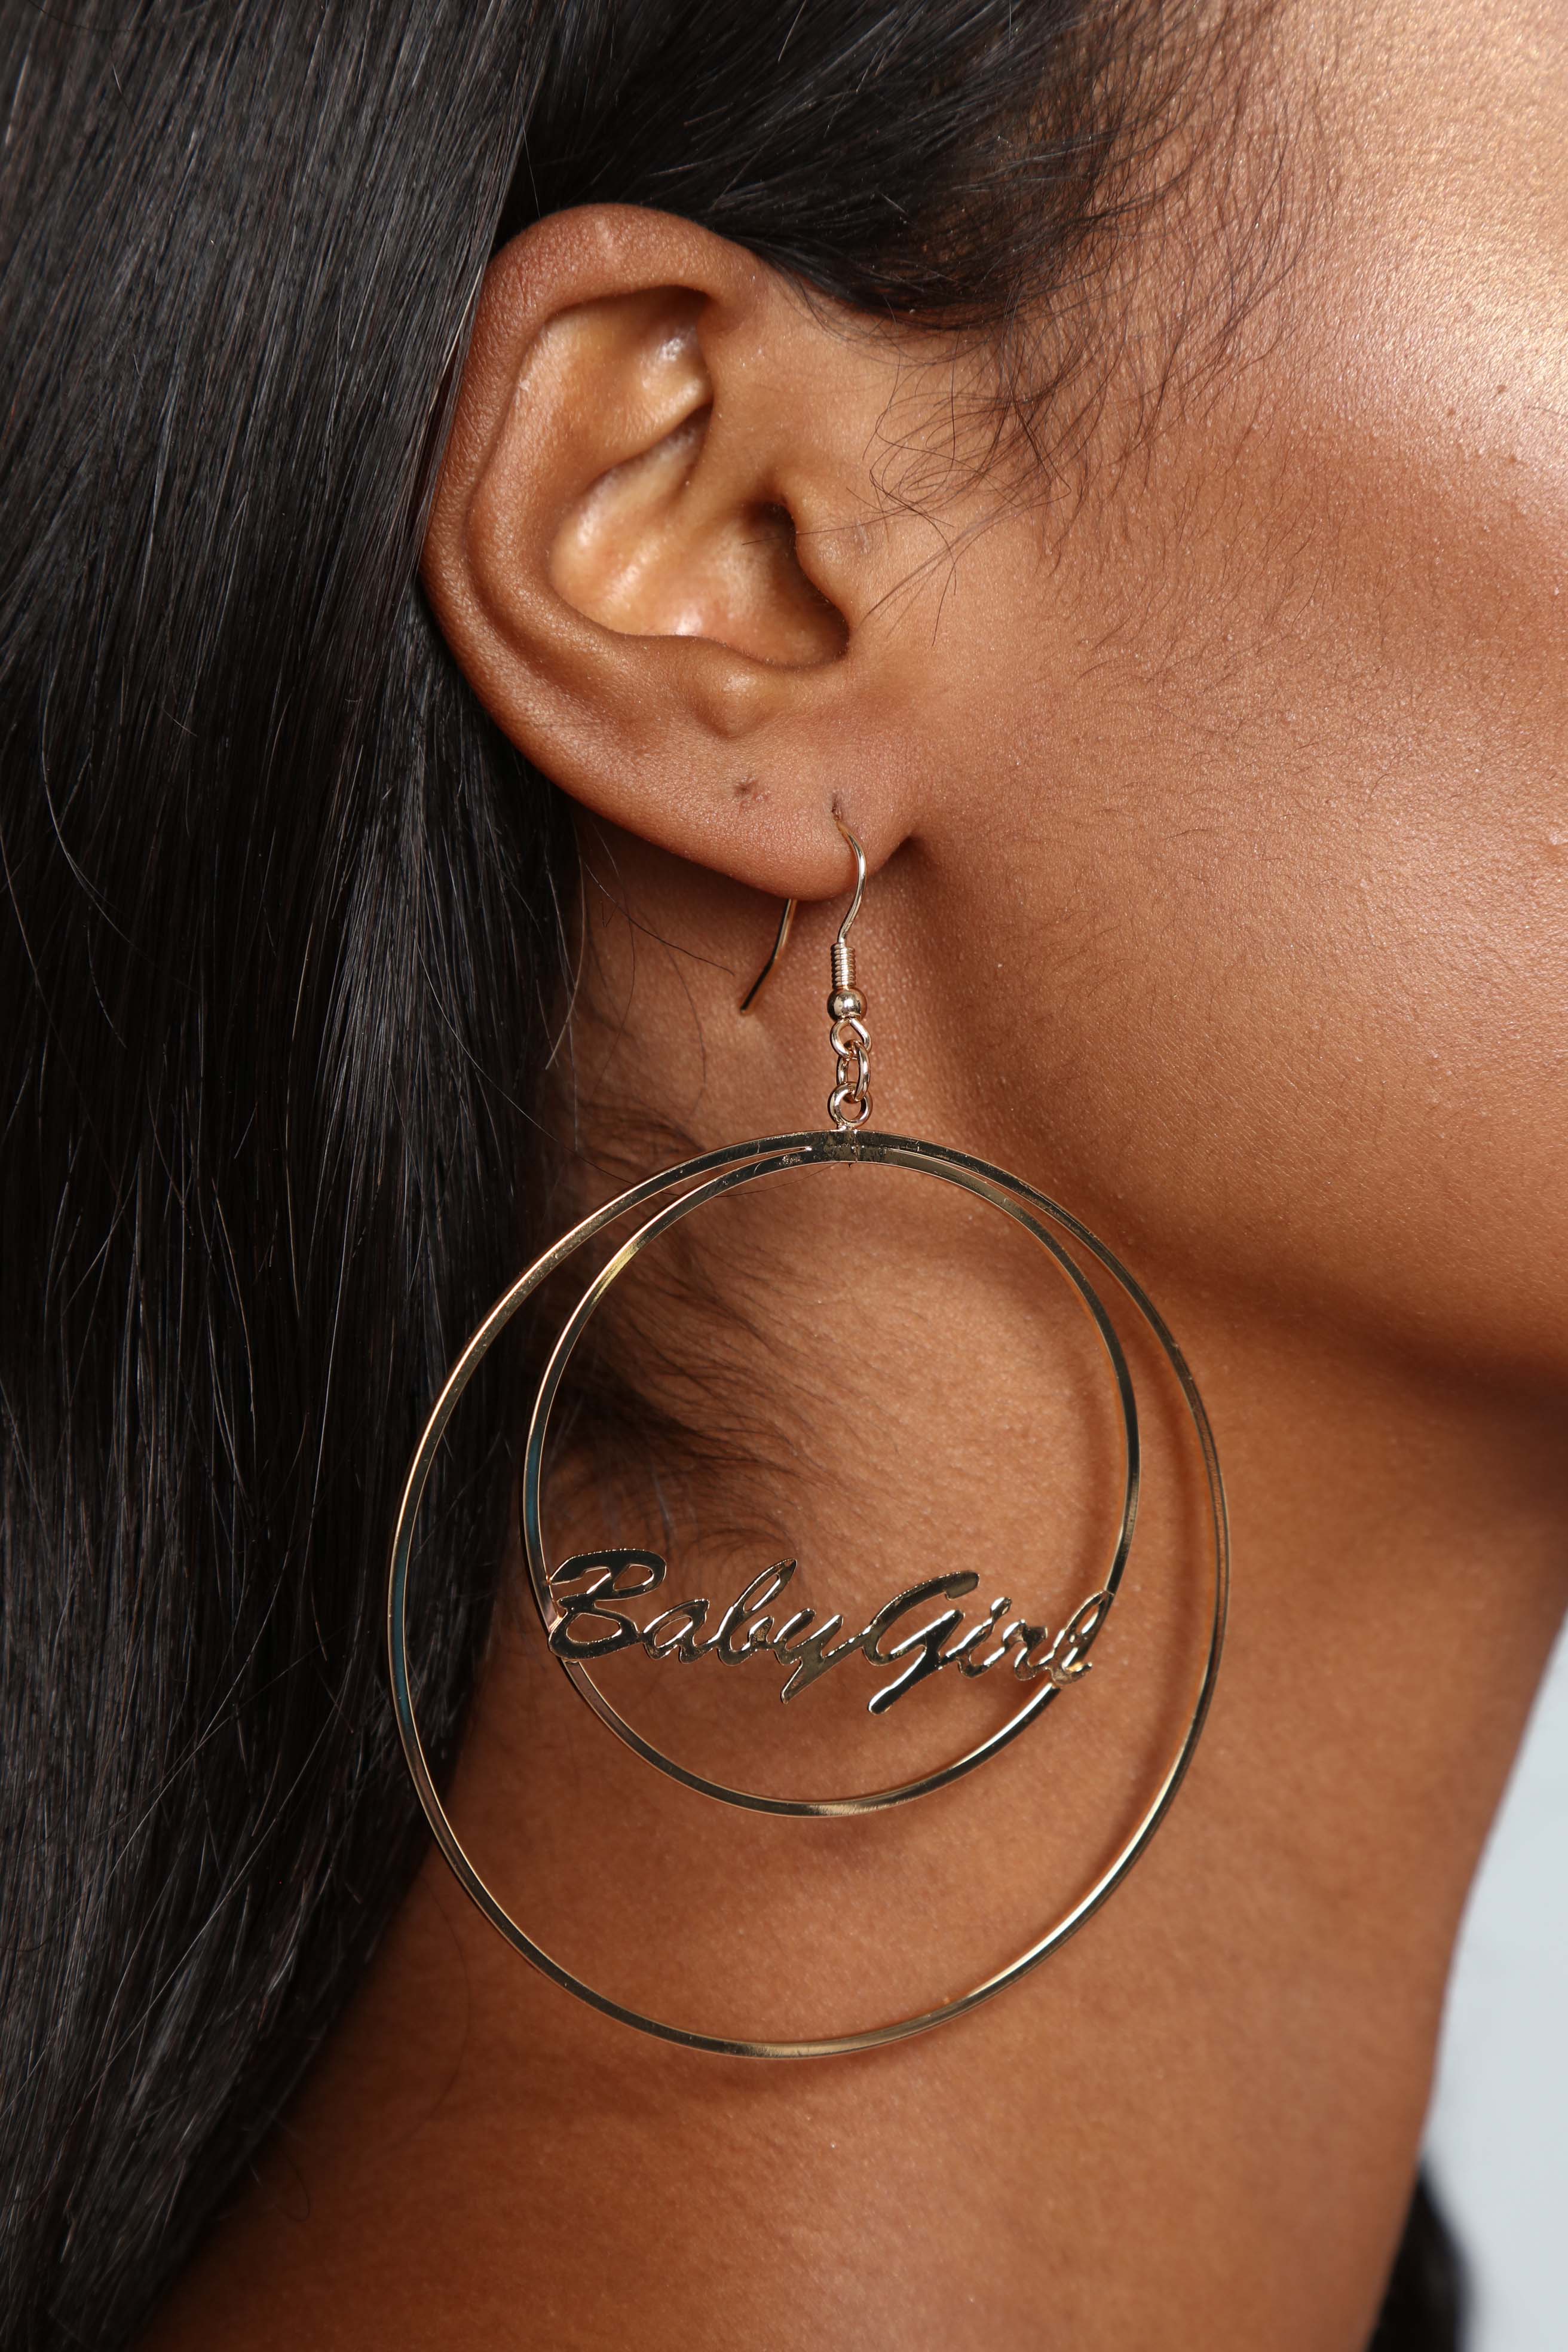 22Kt Gold Fancy Hoops for Baby Girl - ErHp22912 - 22 Karat Gold Fancy Hoops  for Baby Girl. Earrings are designed with beaded Gold ball at the center w